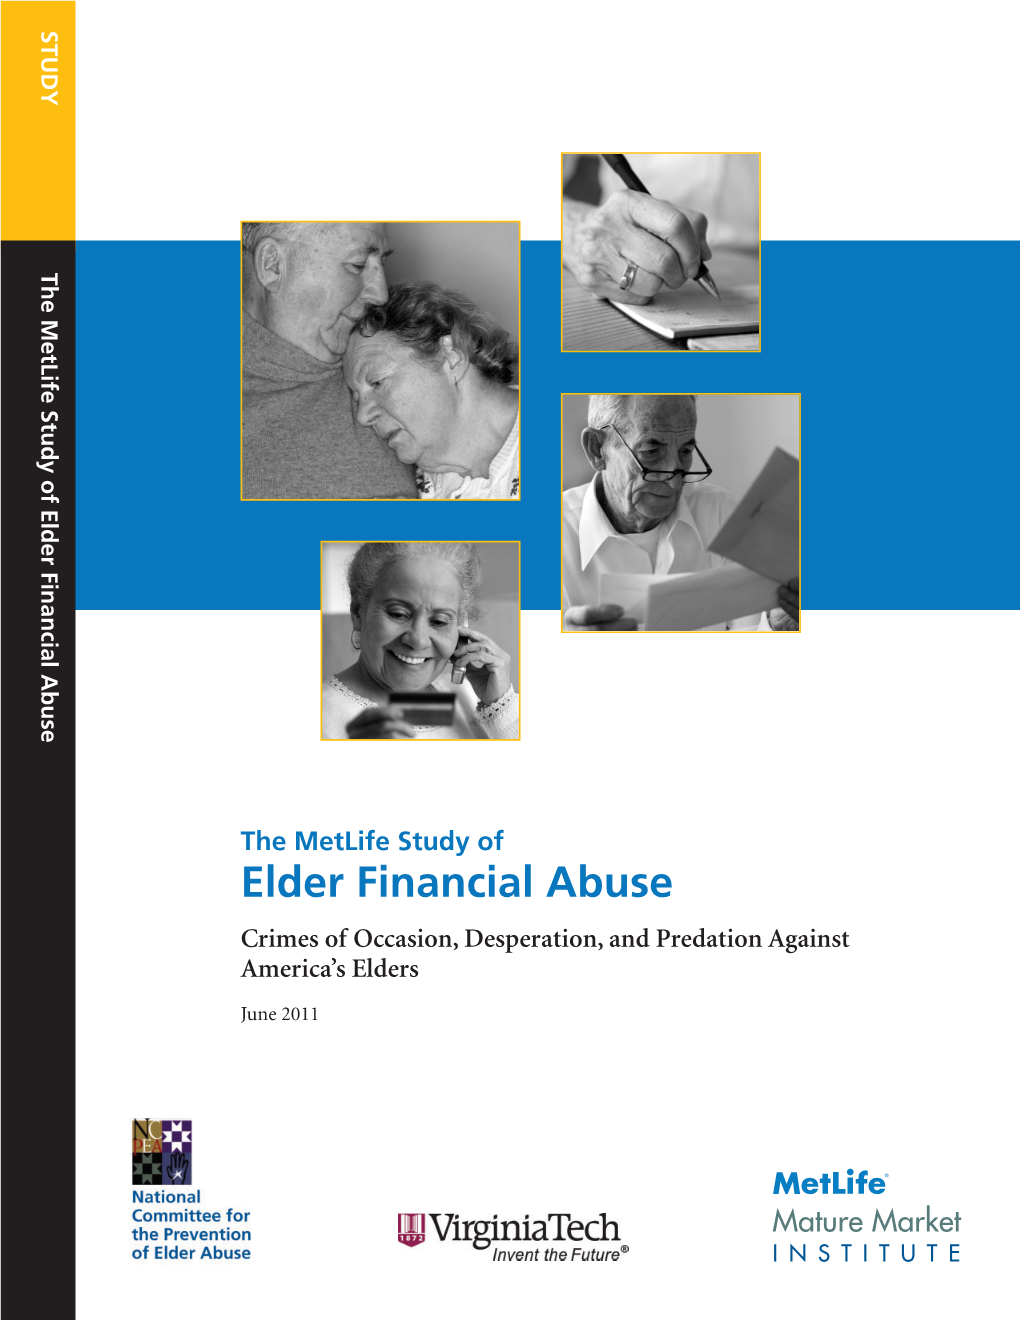 Metlife Study of Elder Financial Abuse: Crimes of Occasion